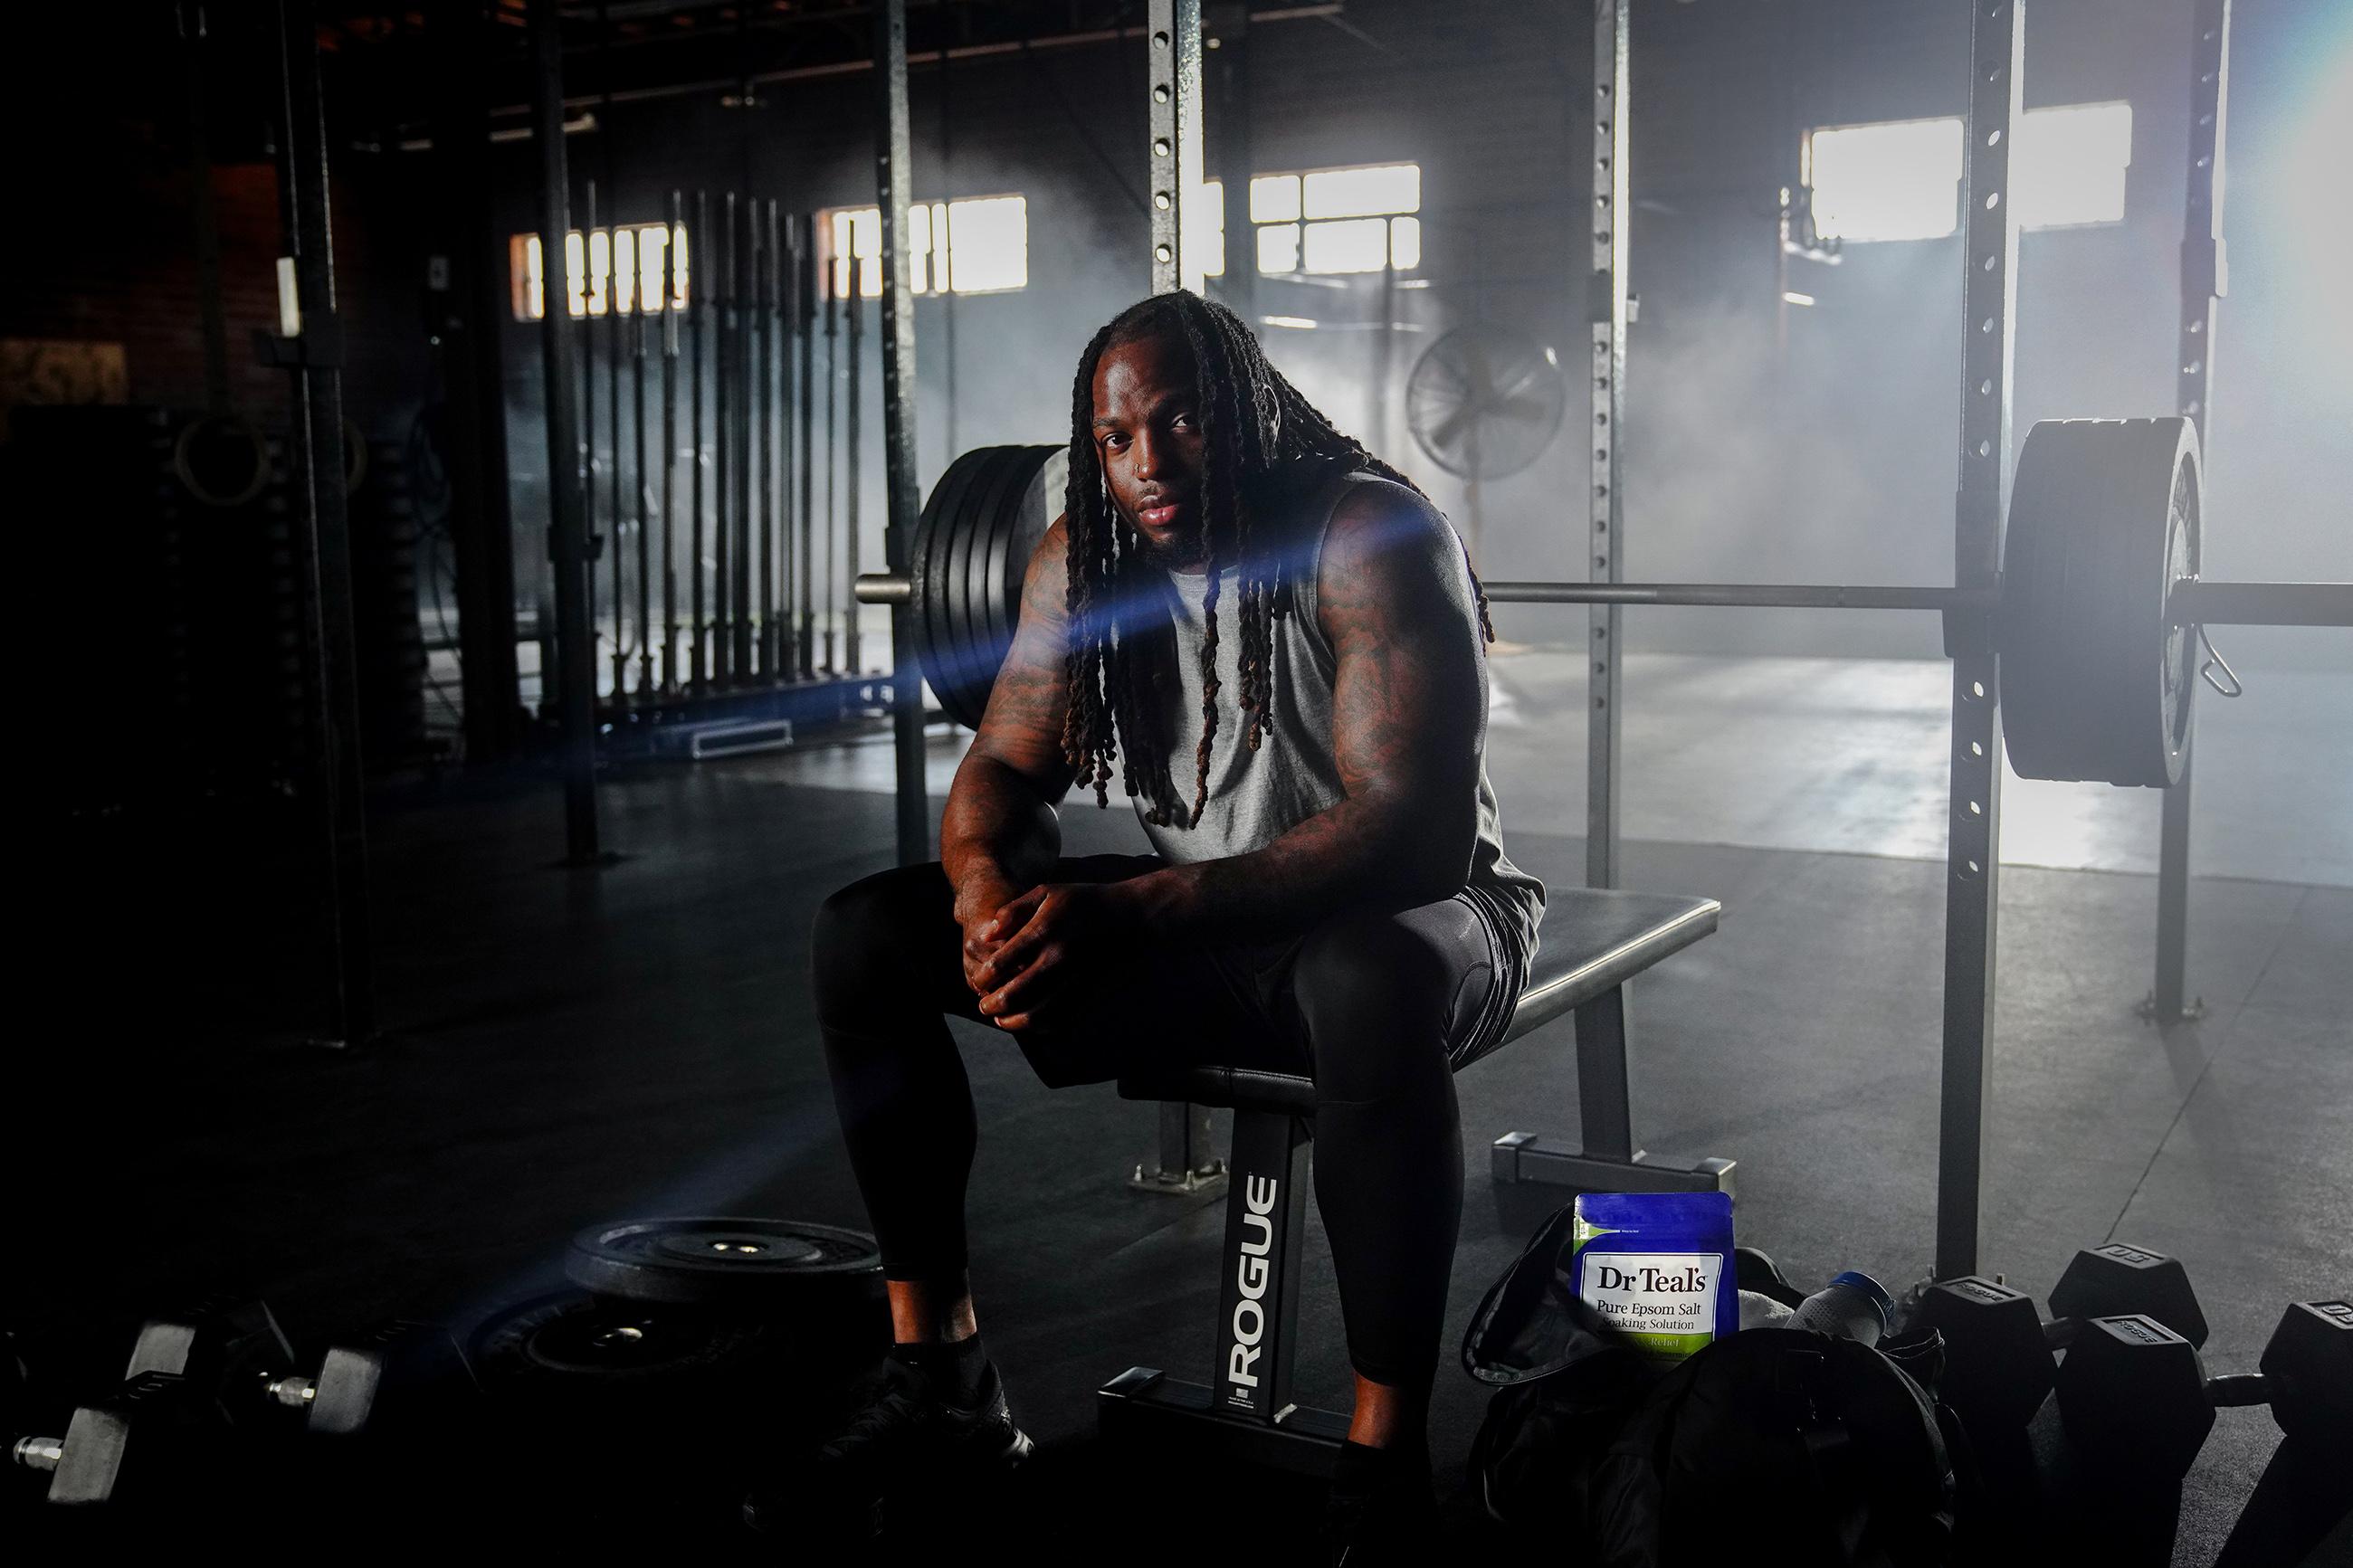 New season, same recovery plan. Two-time rushing yards leader Derrick Henry shares the benefits of muscle recovery with Dr Teal’s Epsom Salt Soaks